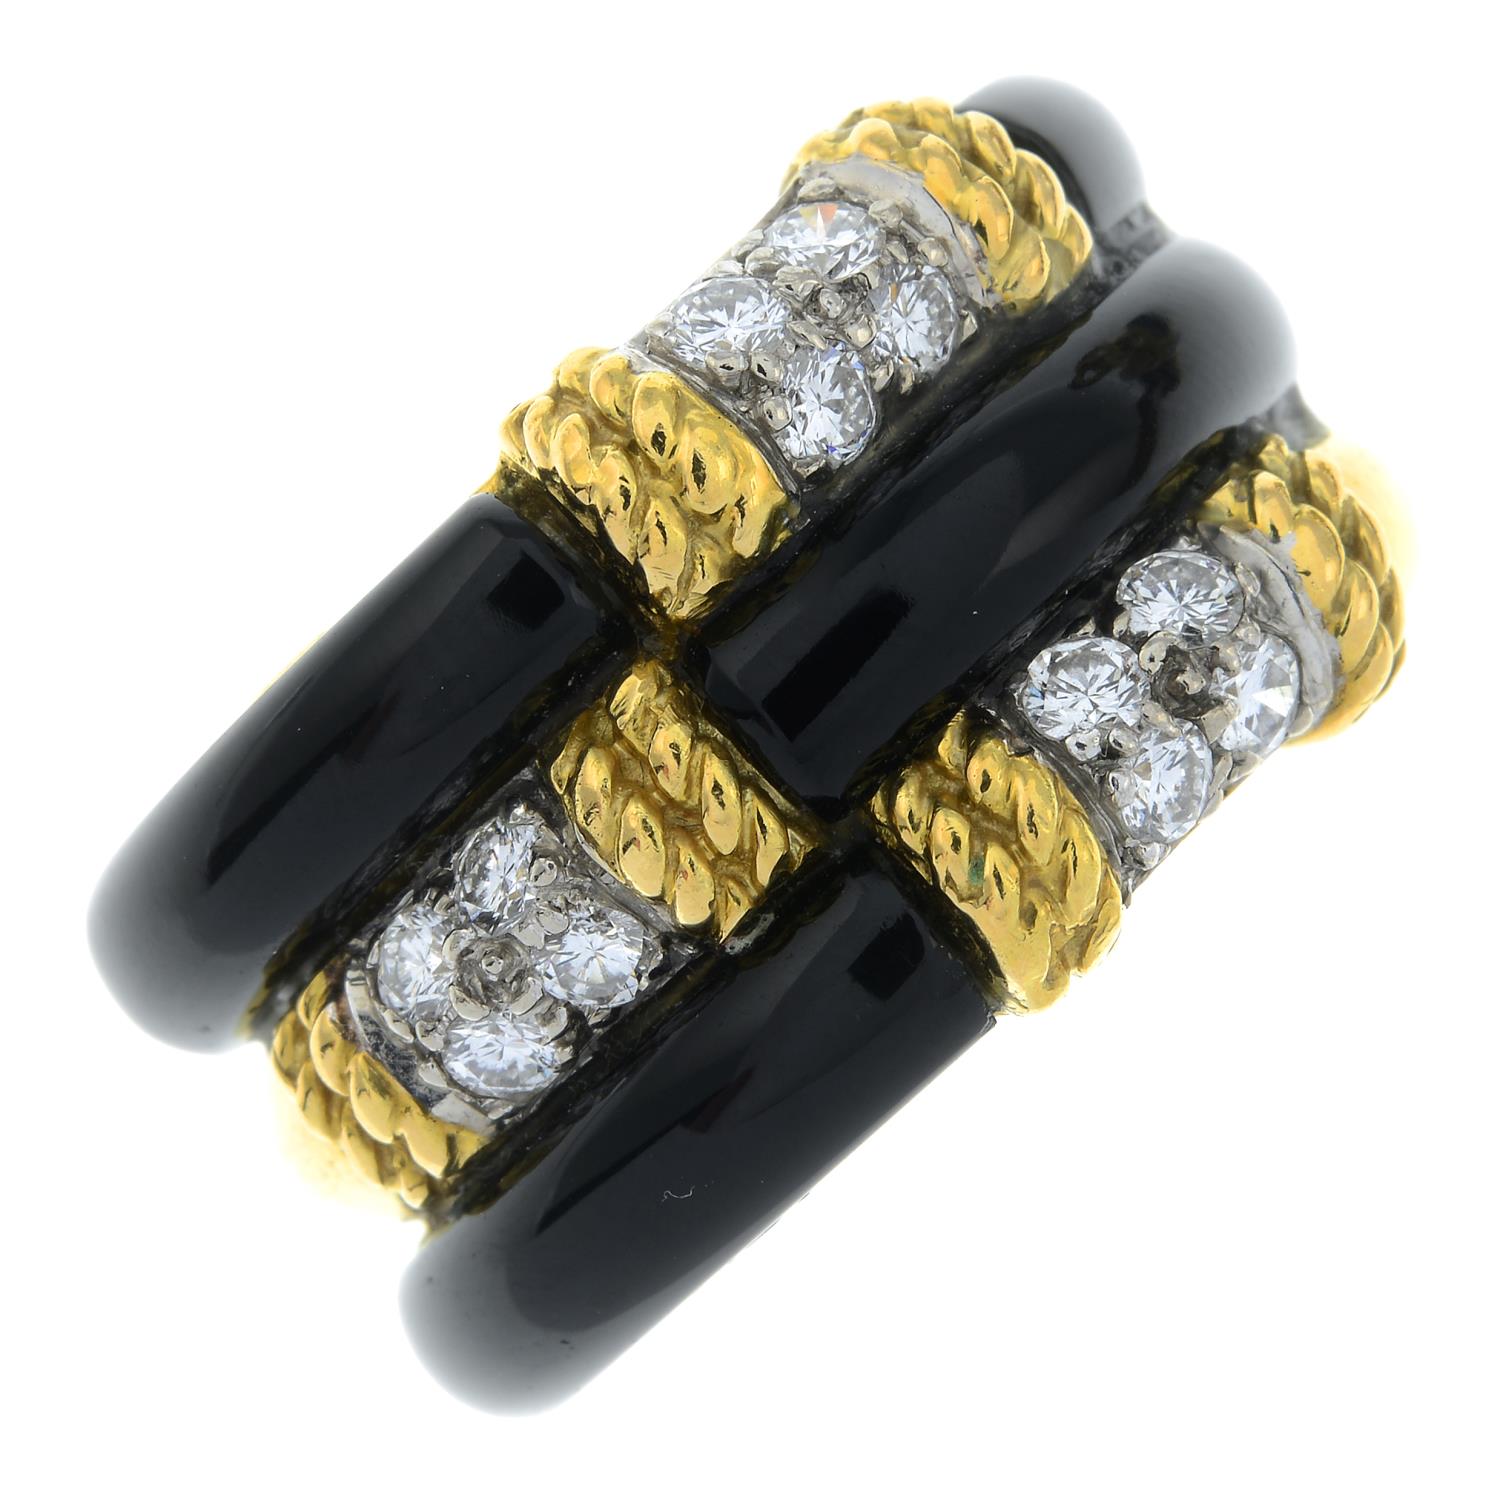 A suite of onyx and diamond jewellery, - Image 2 of 6